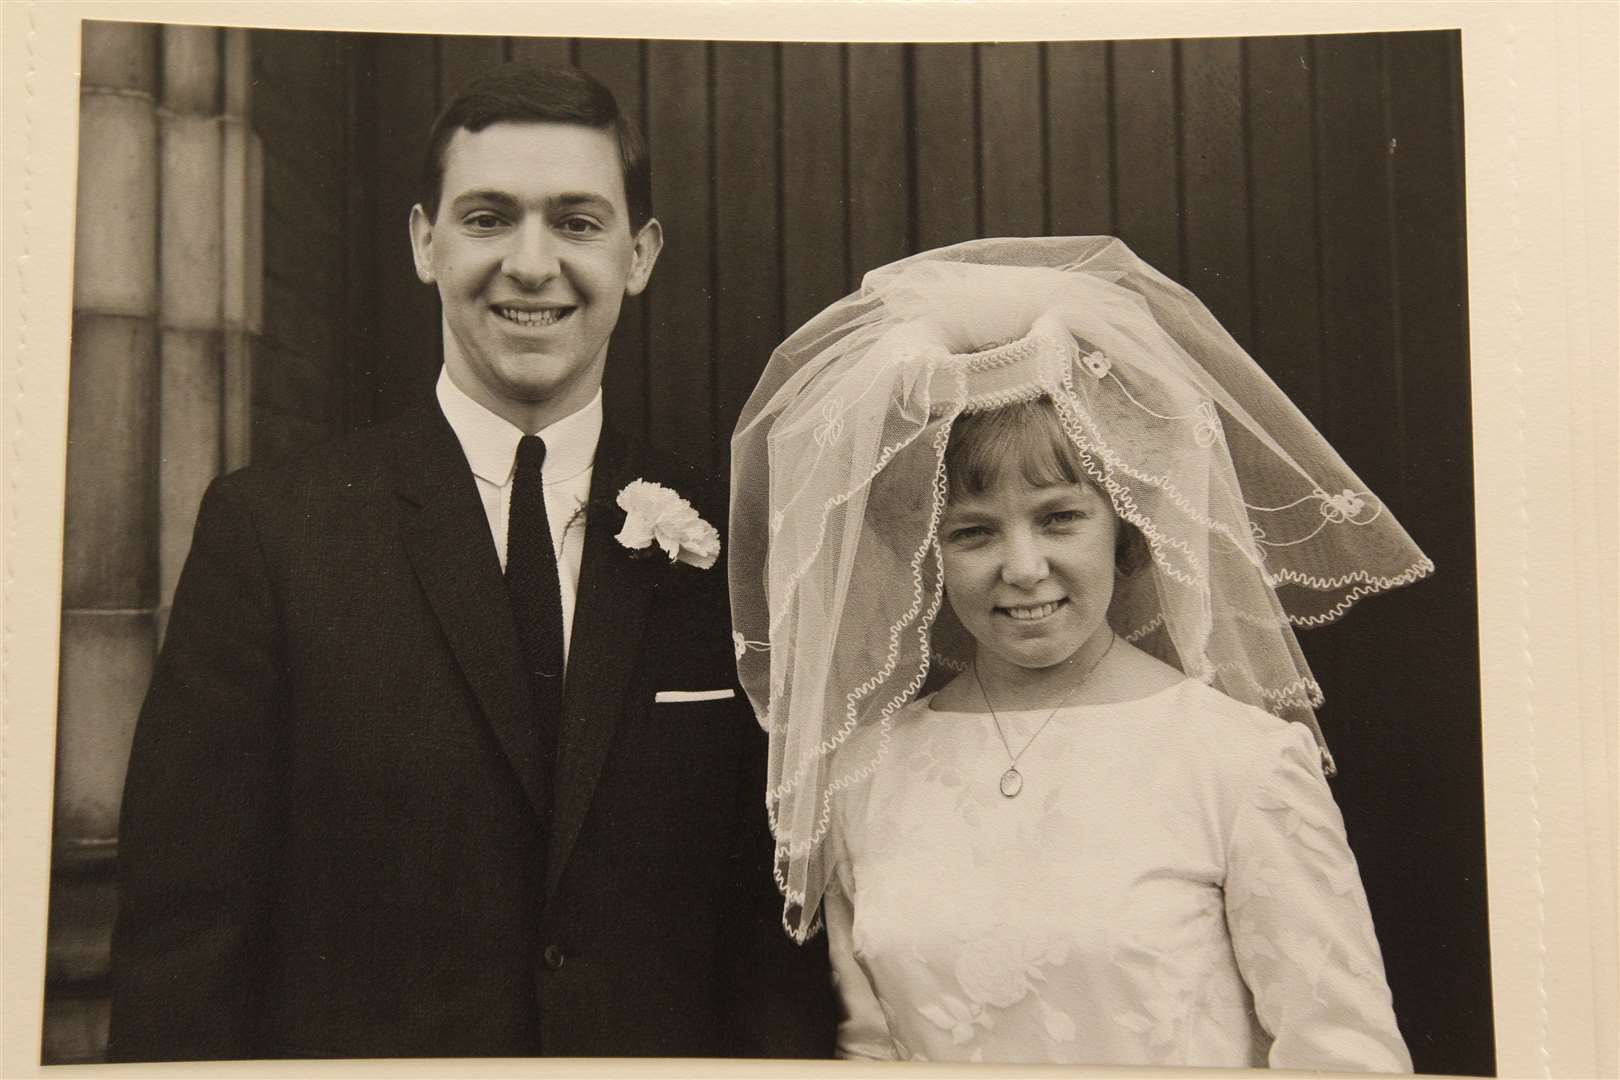 Michael Brown with his wife Pamela, on their wedding day 50 years ago